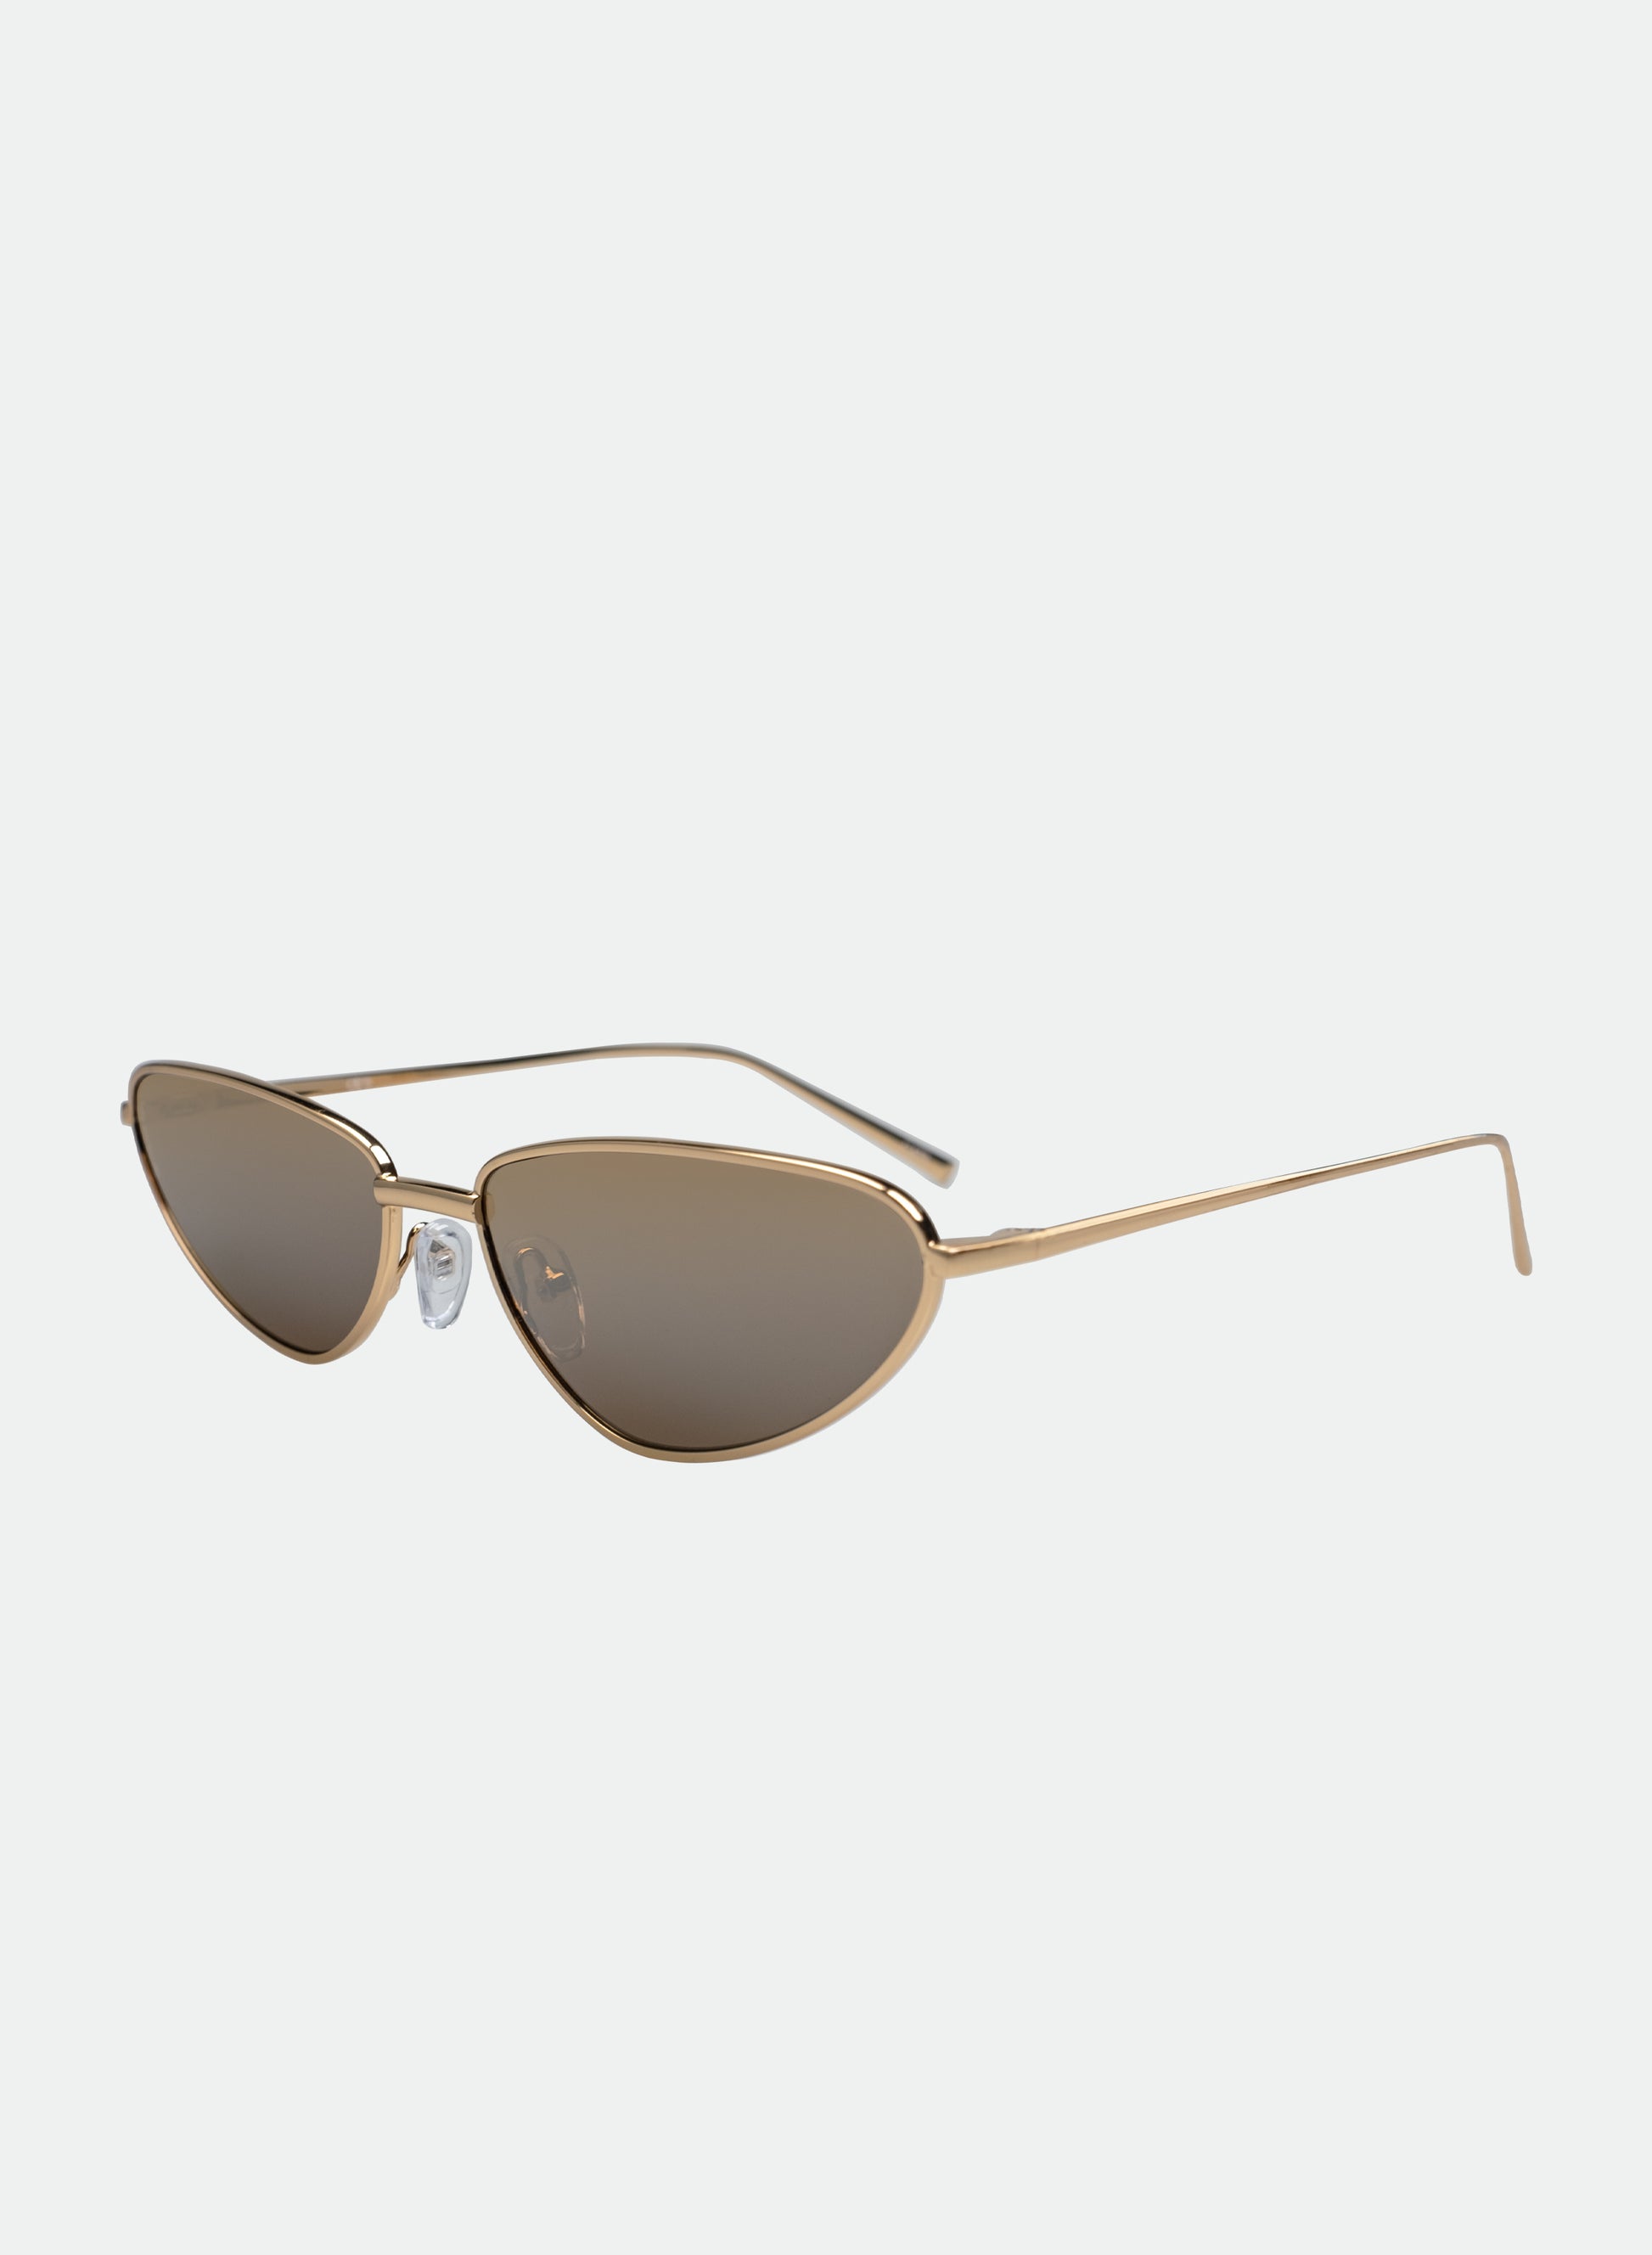 Aster gold sunglasses side view